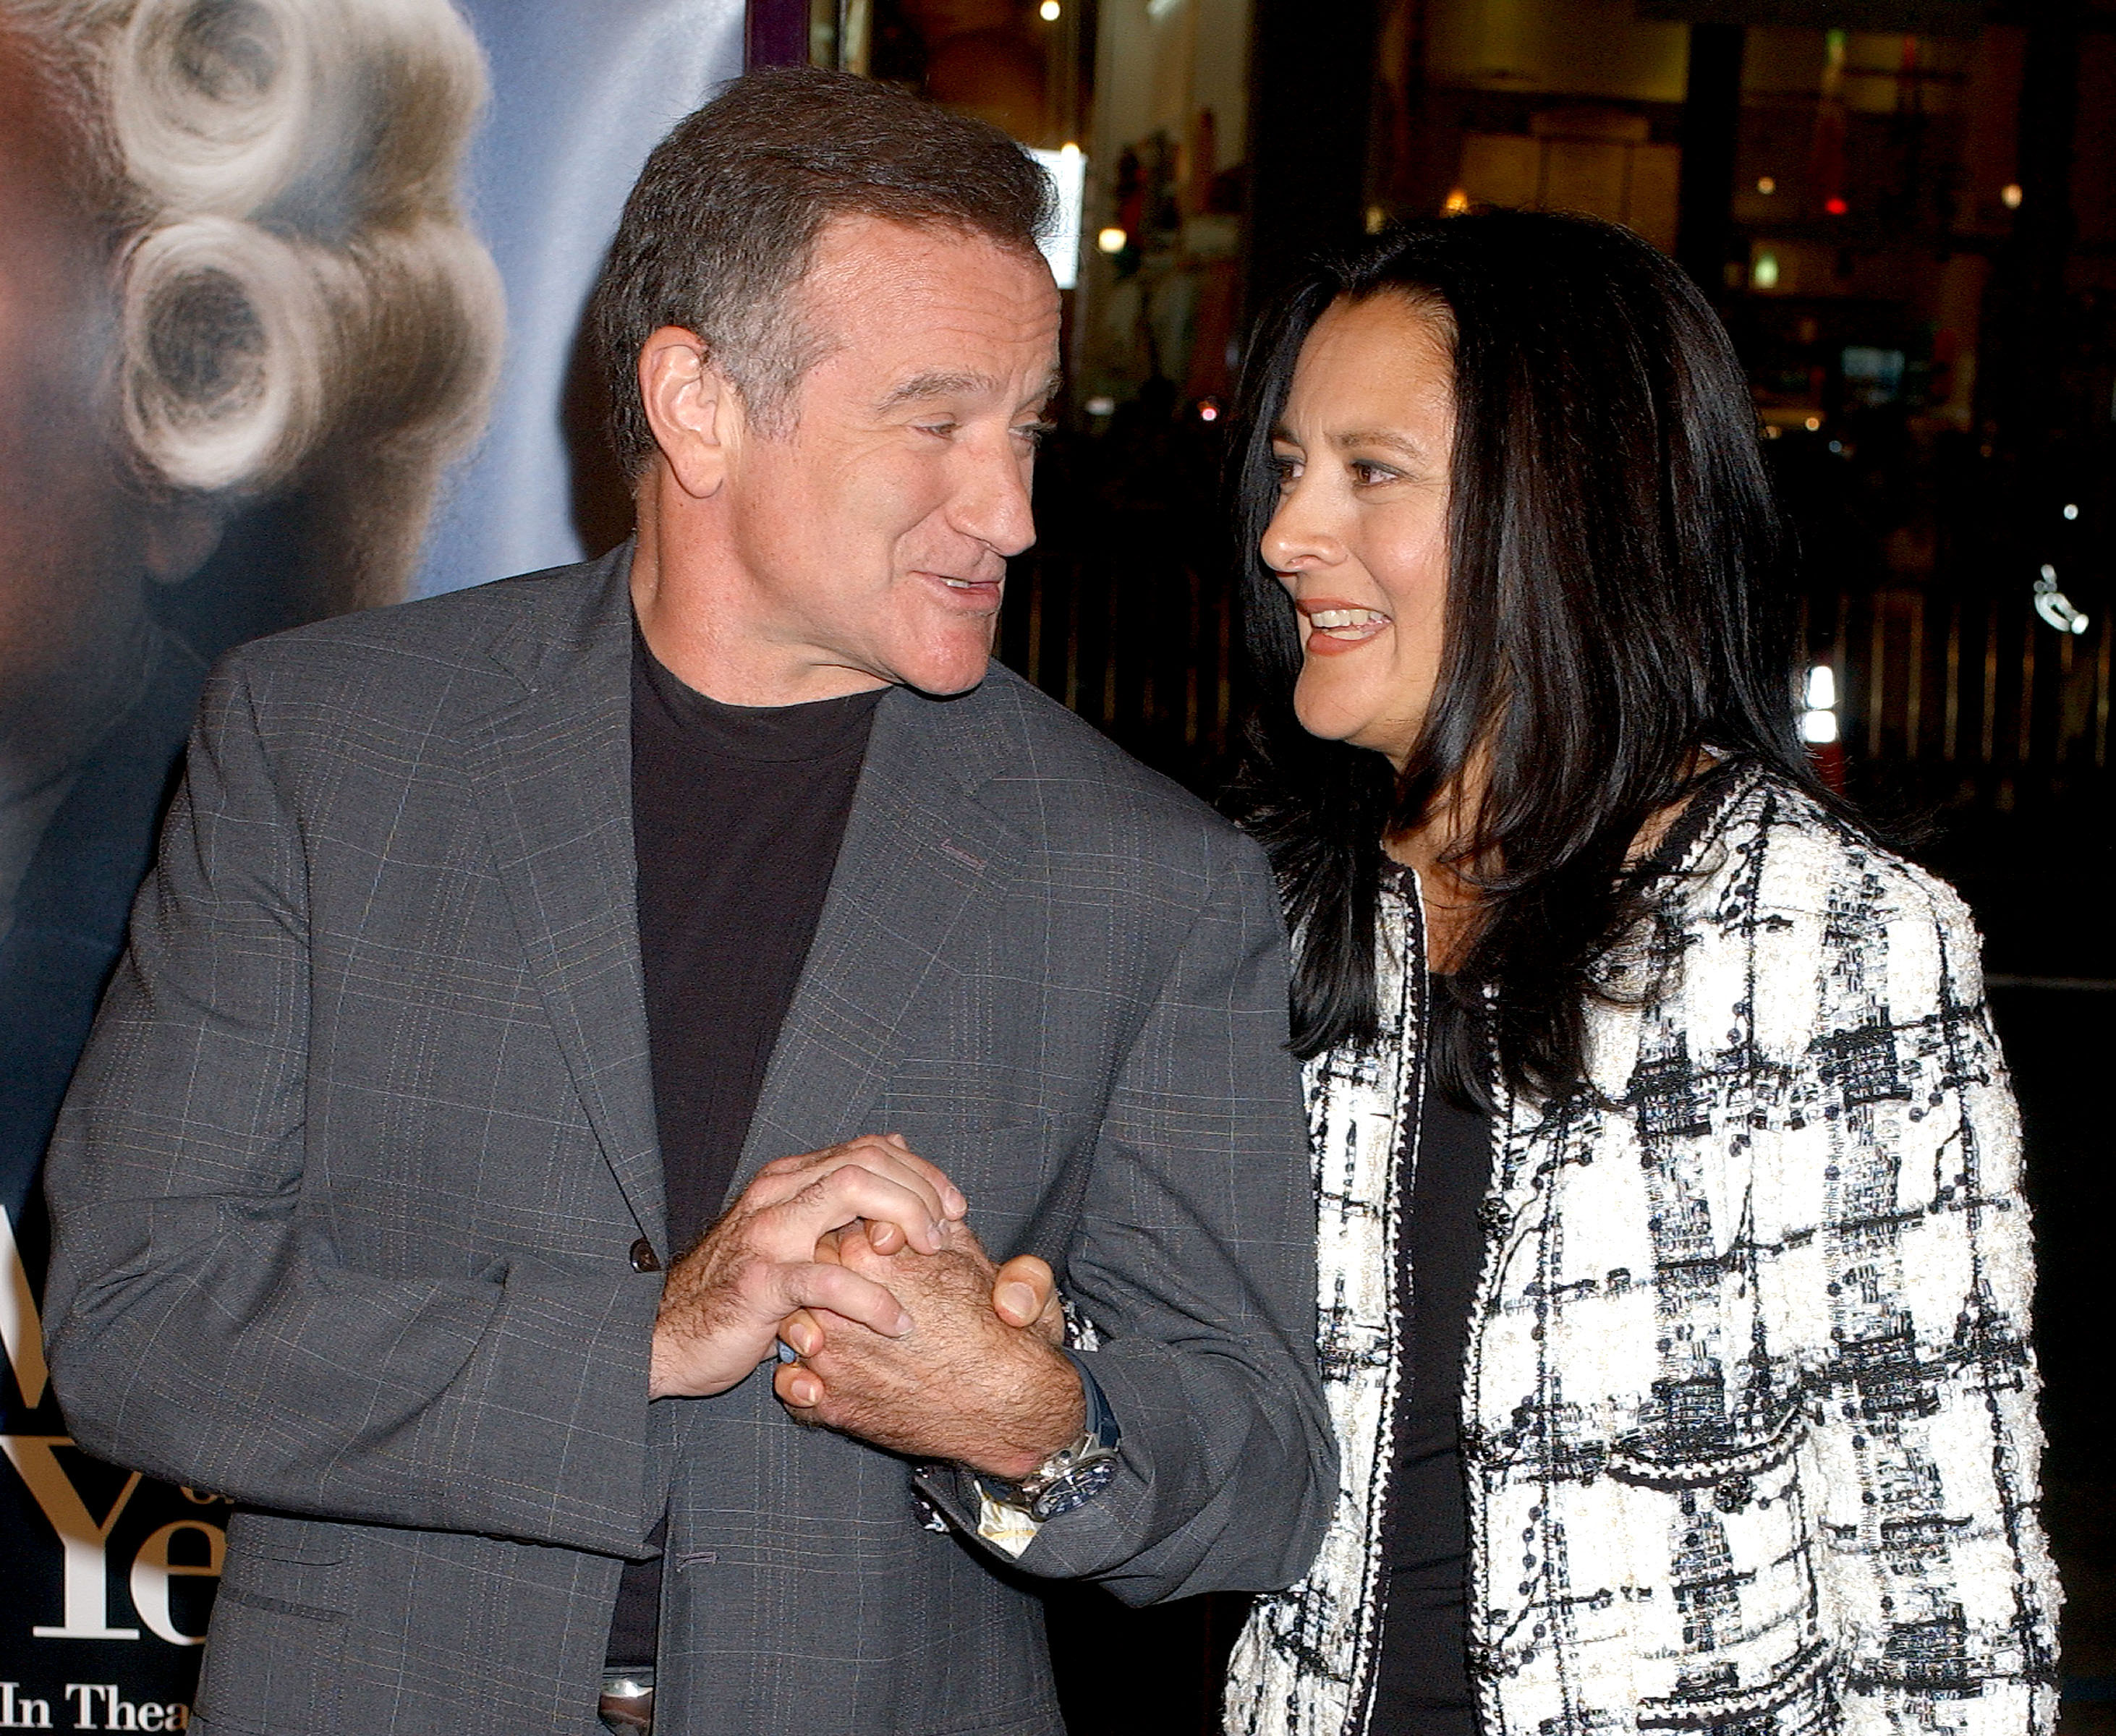 Robin Williams and Marsha Garces Williams at the "Man of the Year" premiere in Hollywood, California on October 4, 2006 | Source: Getty Images